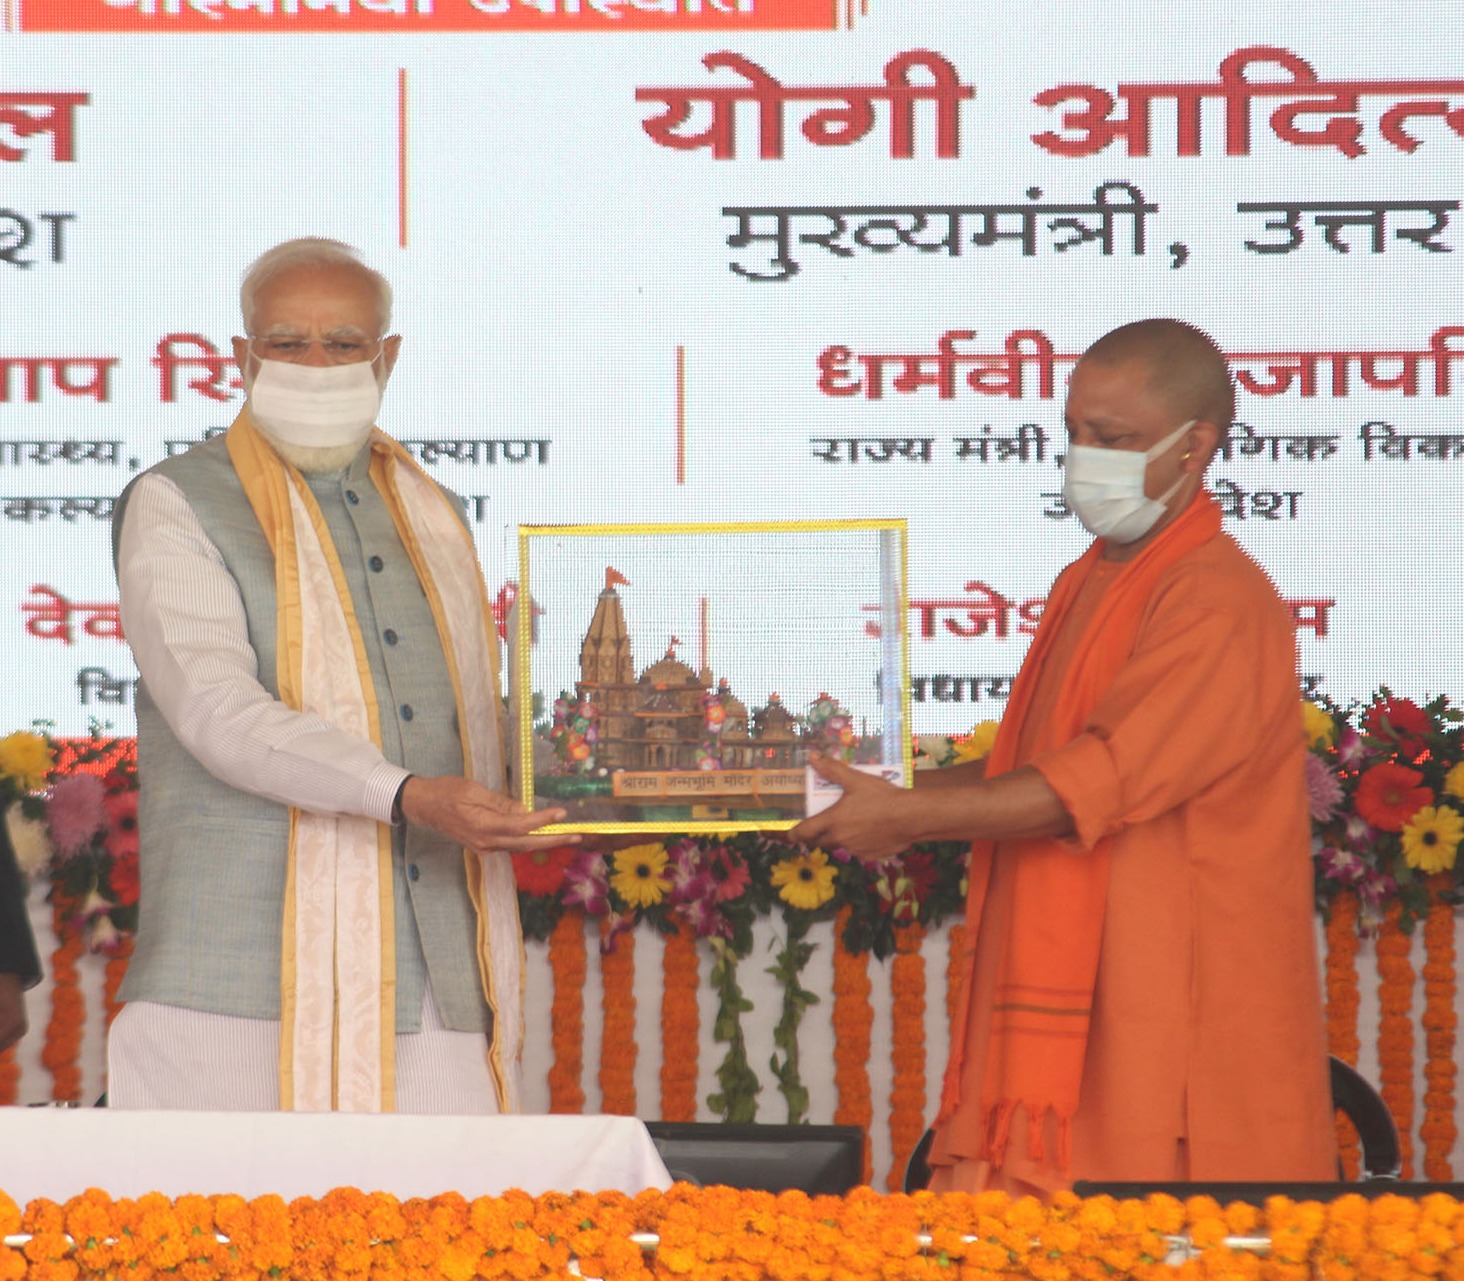 Inauguration Images of Purvanchal Expressway date 16 Nov 2021